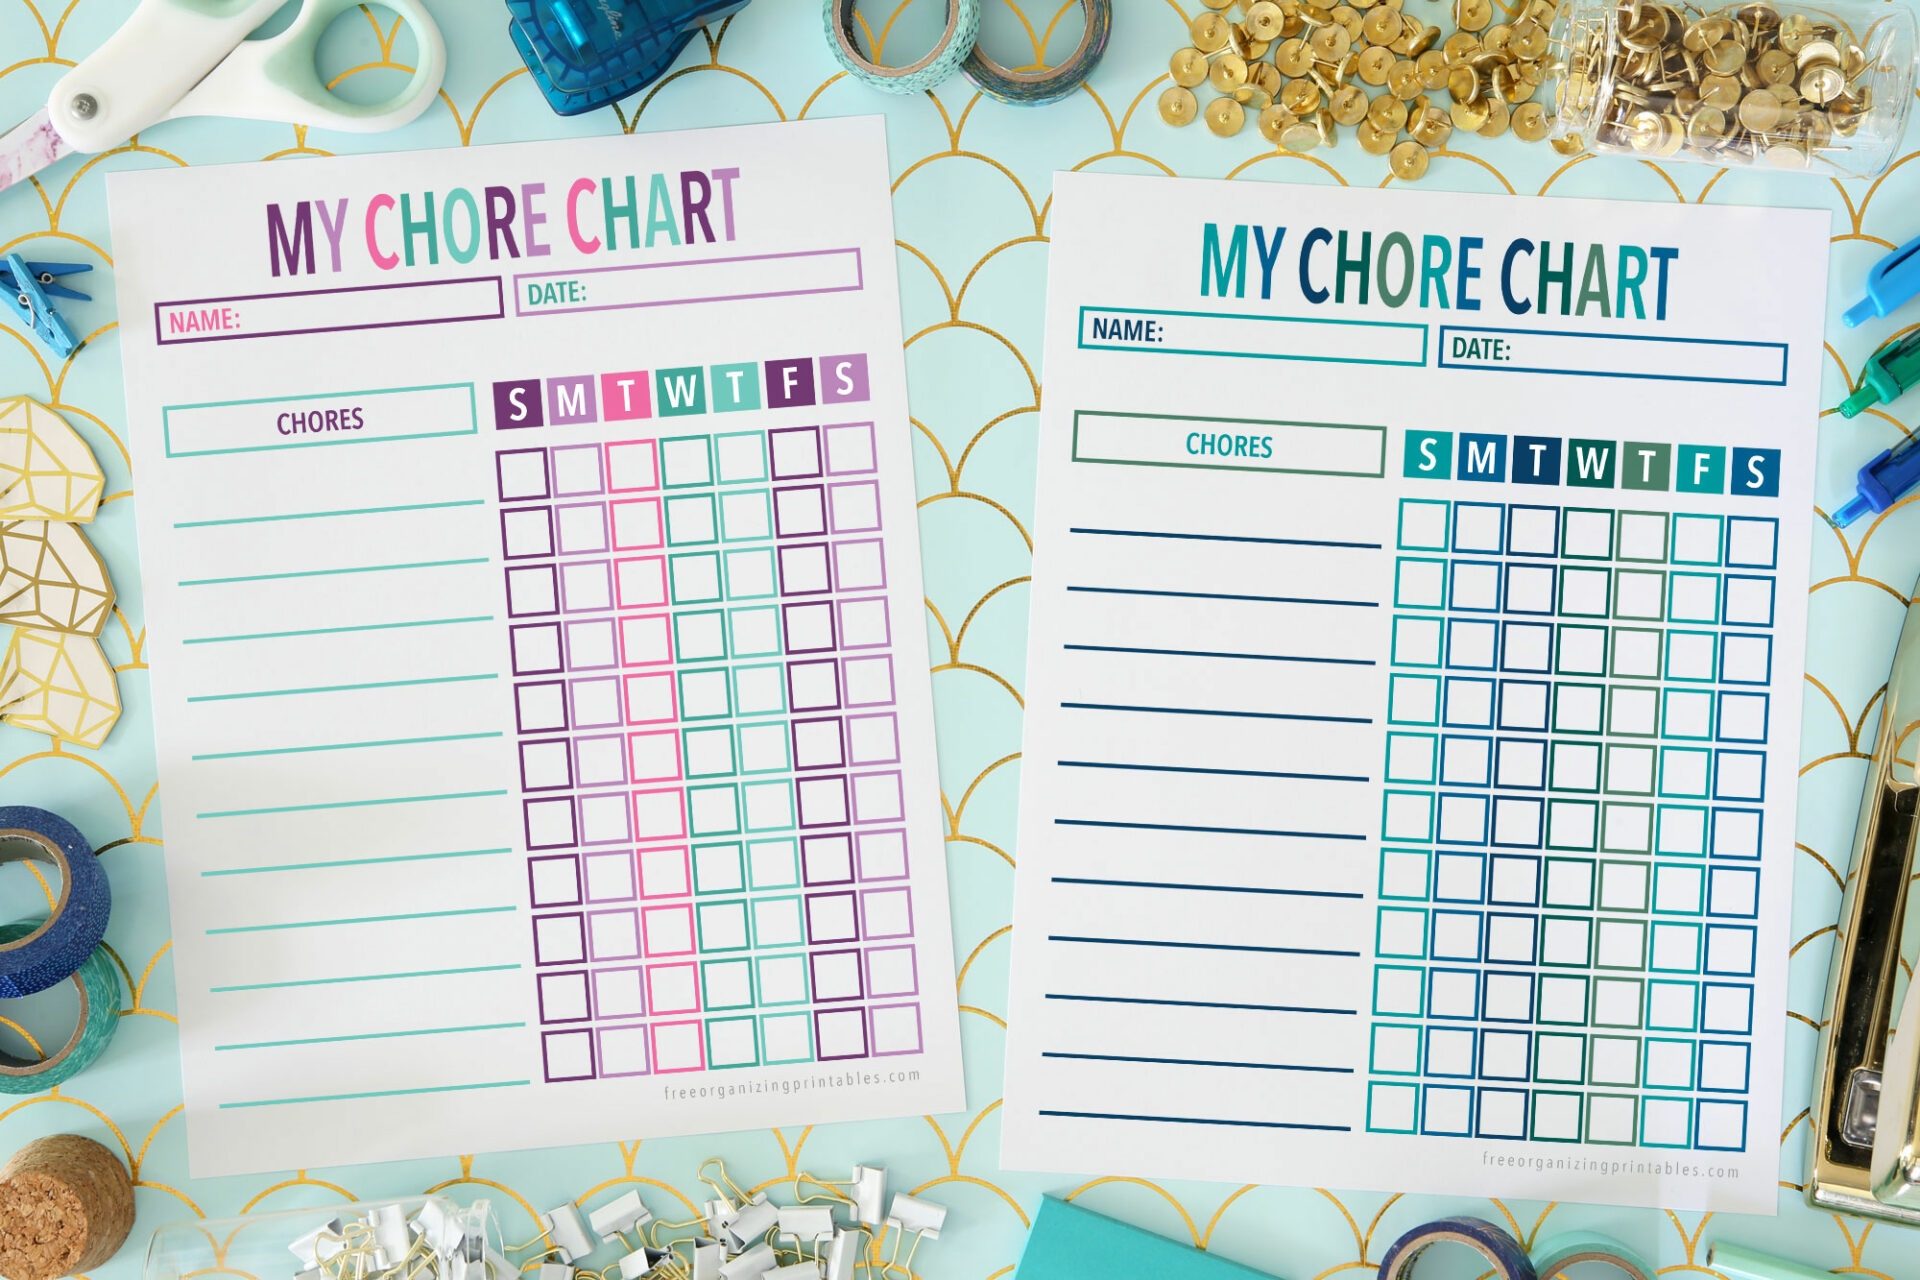 Free Printable Chore Charts For Kids And Adults - Free Printable Chore Charts For 7 Year Olds